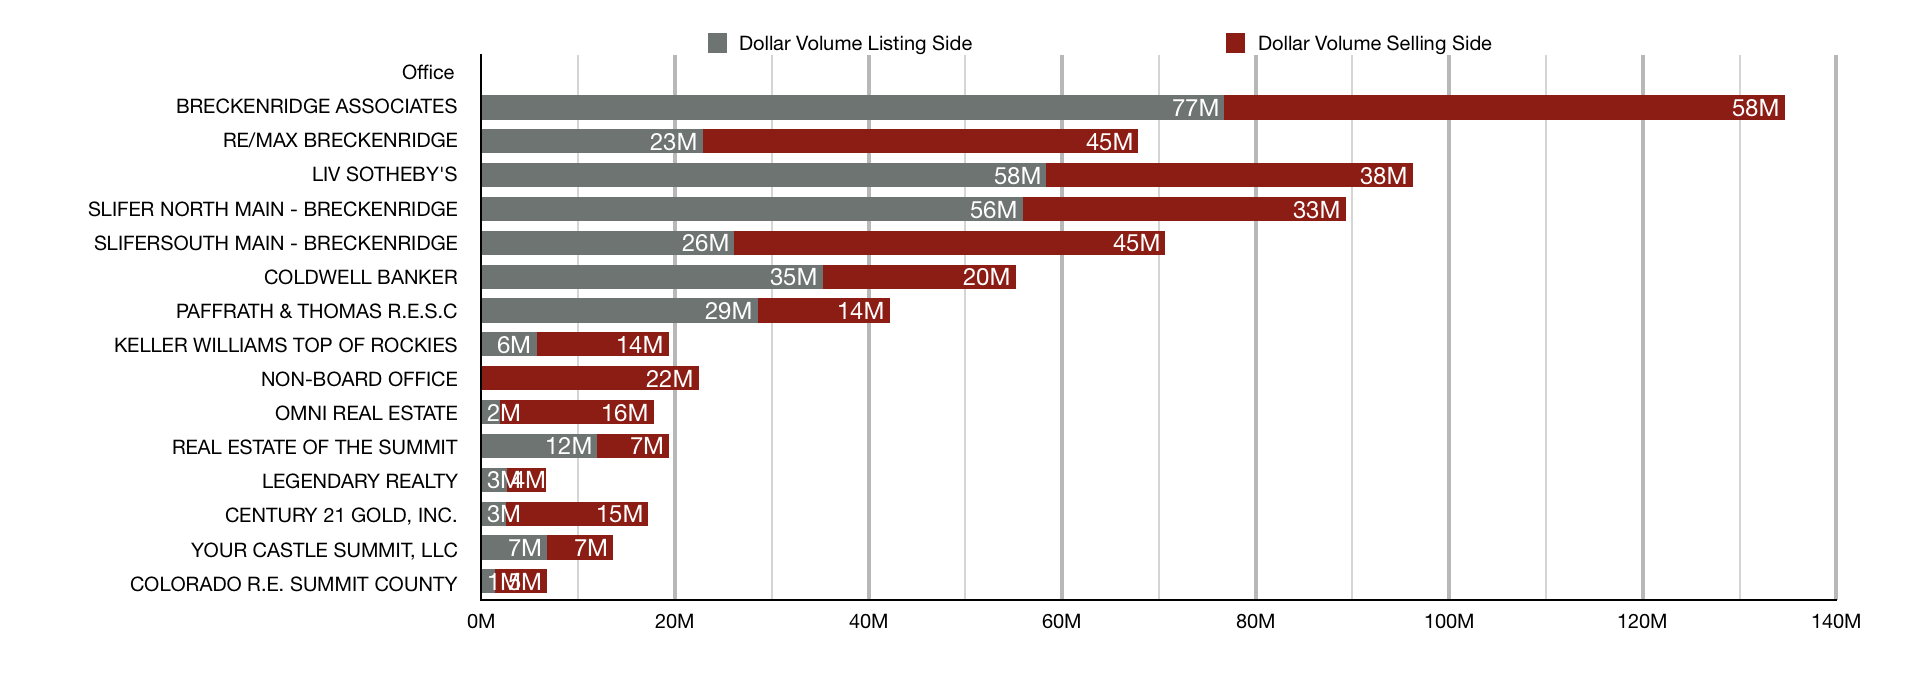 chart of real estate sales by office ytd sept 1, 2020